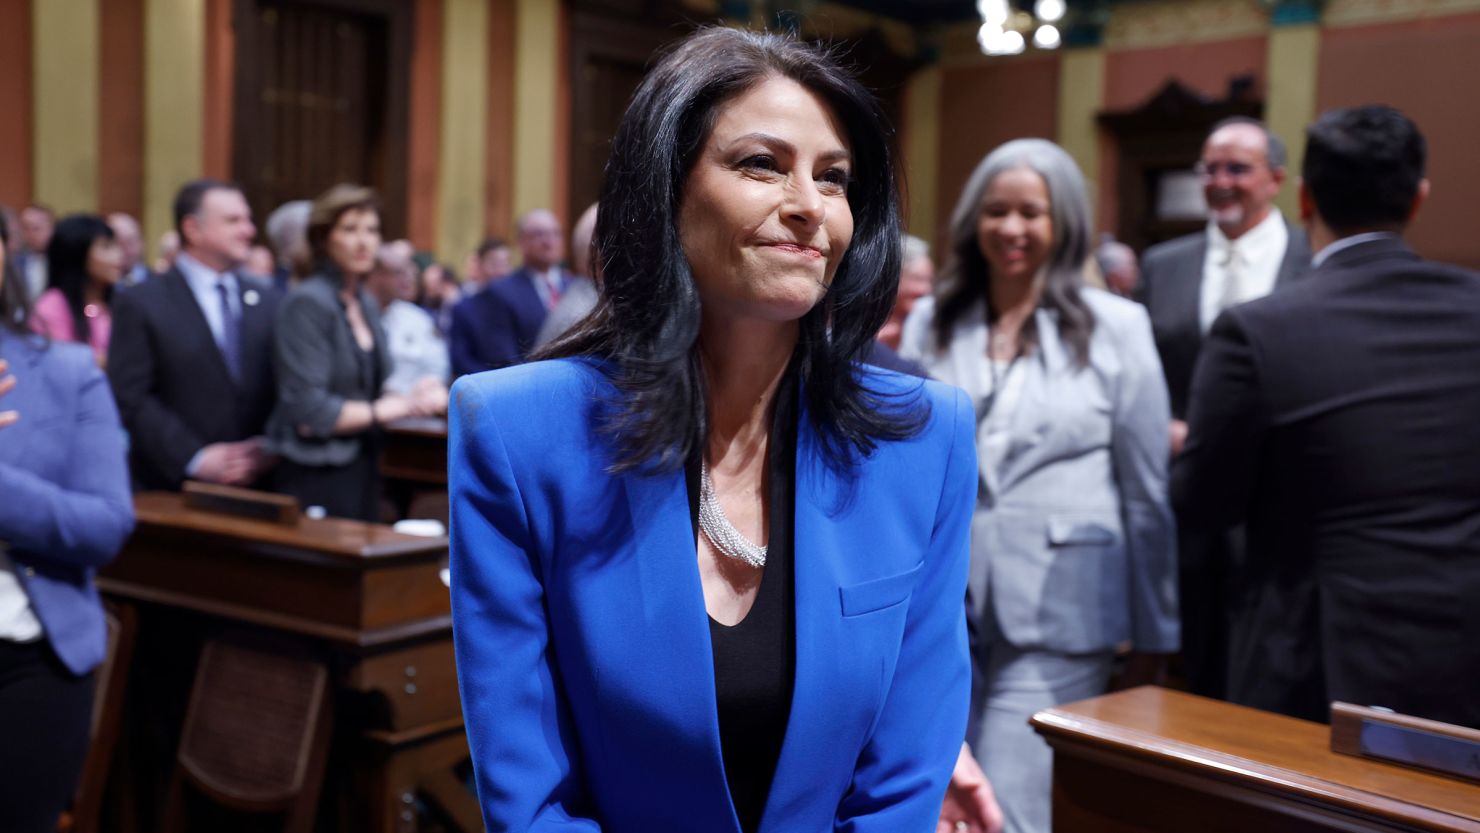 In this January 2023 photo, Attorney General Dana Nessel walks to her seat before the State of the State address in Lansing, Michigan.